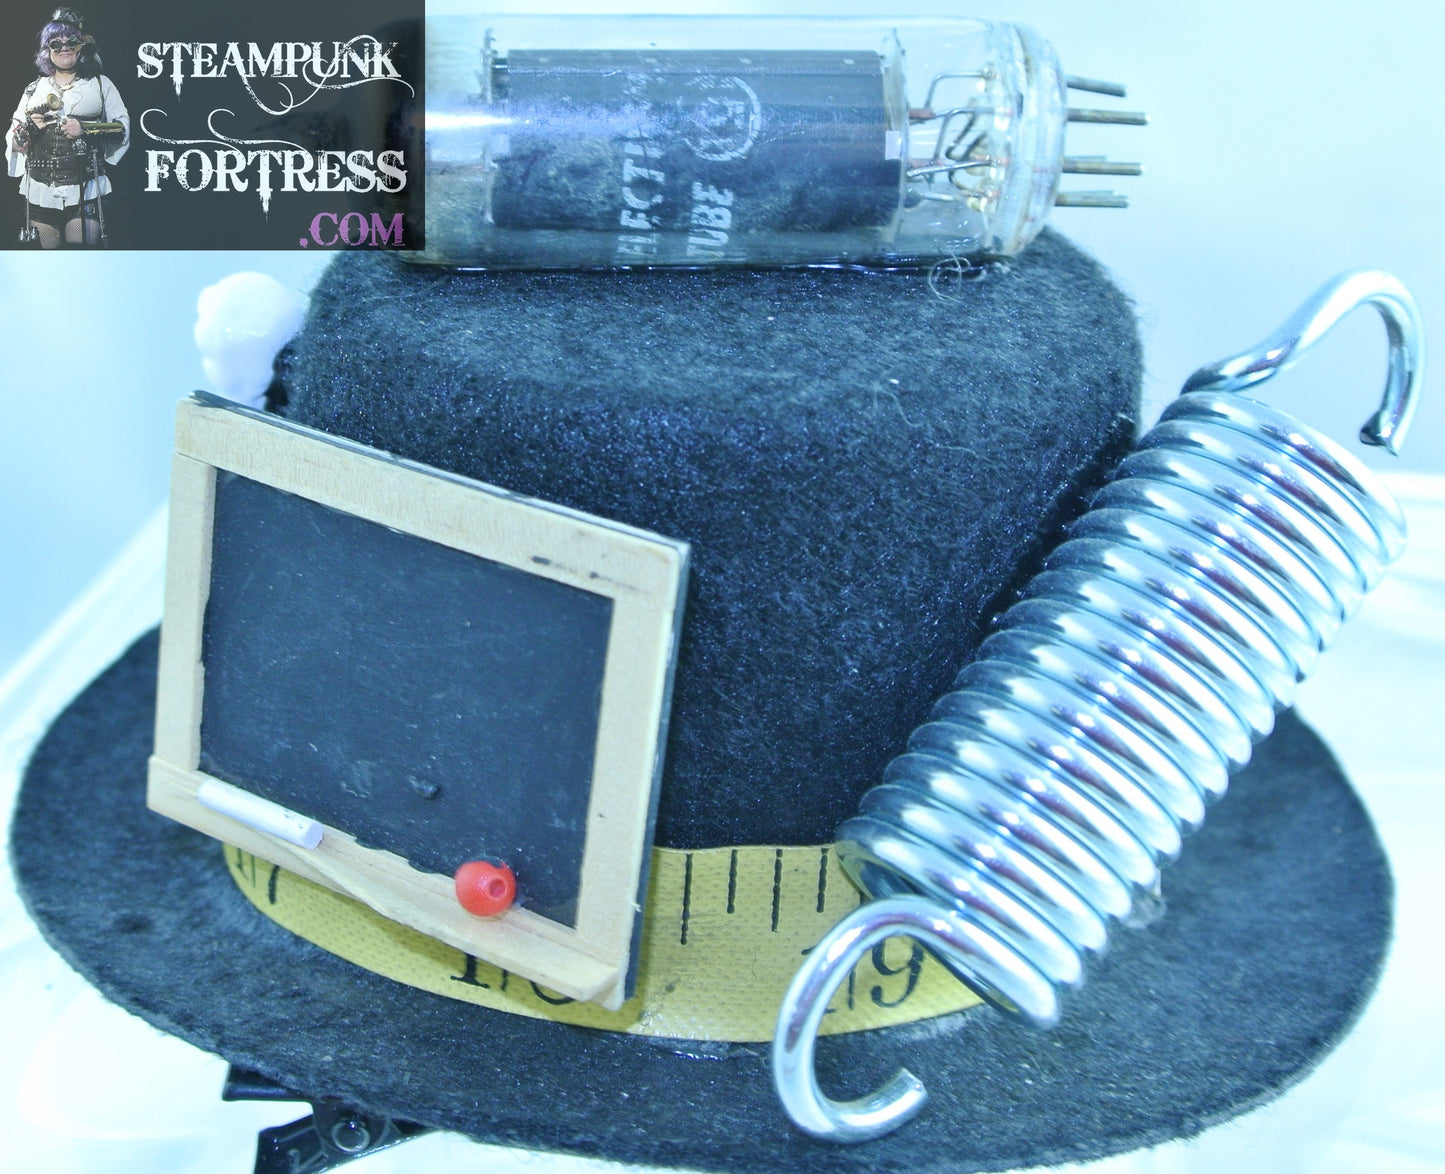 BLACK FRACTURED DOLL CHALKBOARD SPRING CARD BIRDHOUSE FUSE THIMBLE ROCKET TOP TAPE MEASURE BAND XS EXTRA SMALL MINI TOP HAT STARR WILDE STEAMPUNK FORTRESS